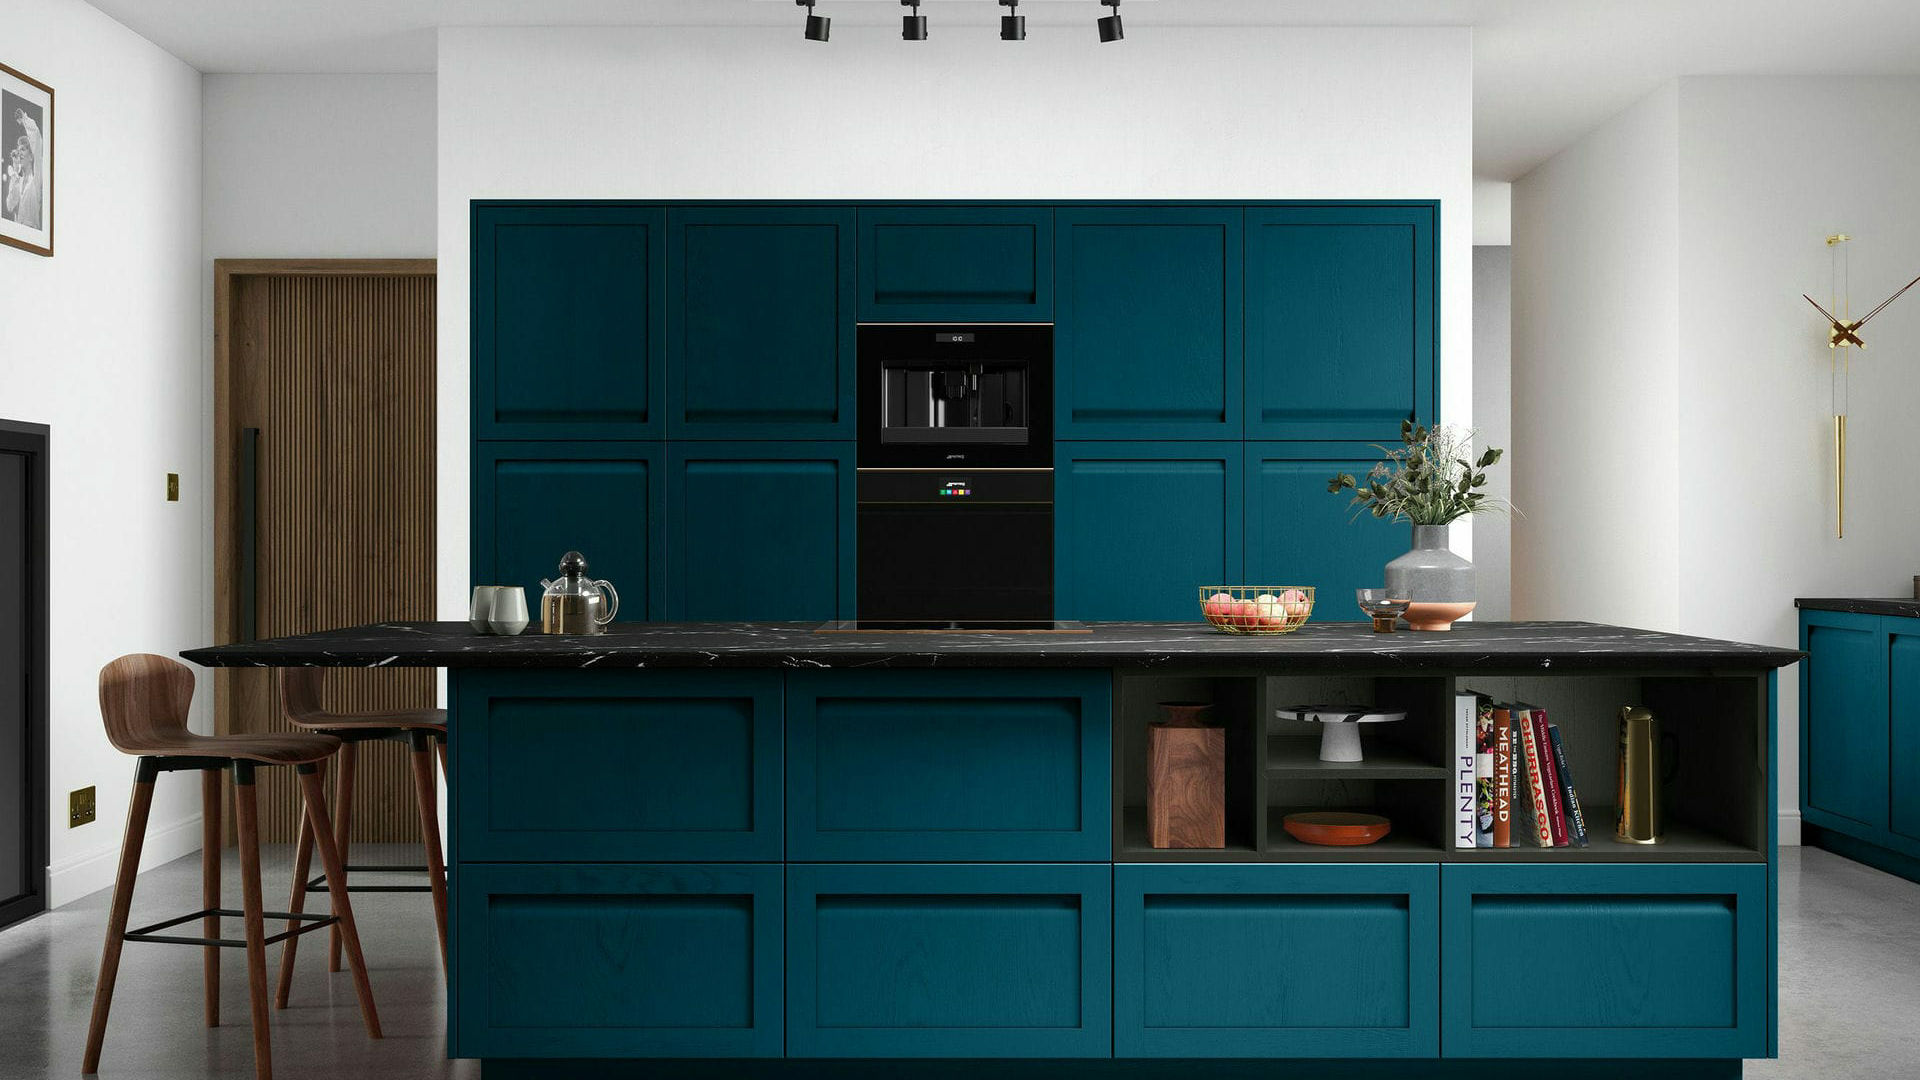 Handleless Solid Wood Marine kitchens combining the warmth of wood with a deep marine blue for a modern feel